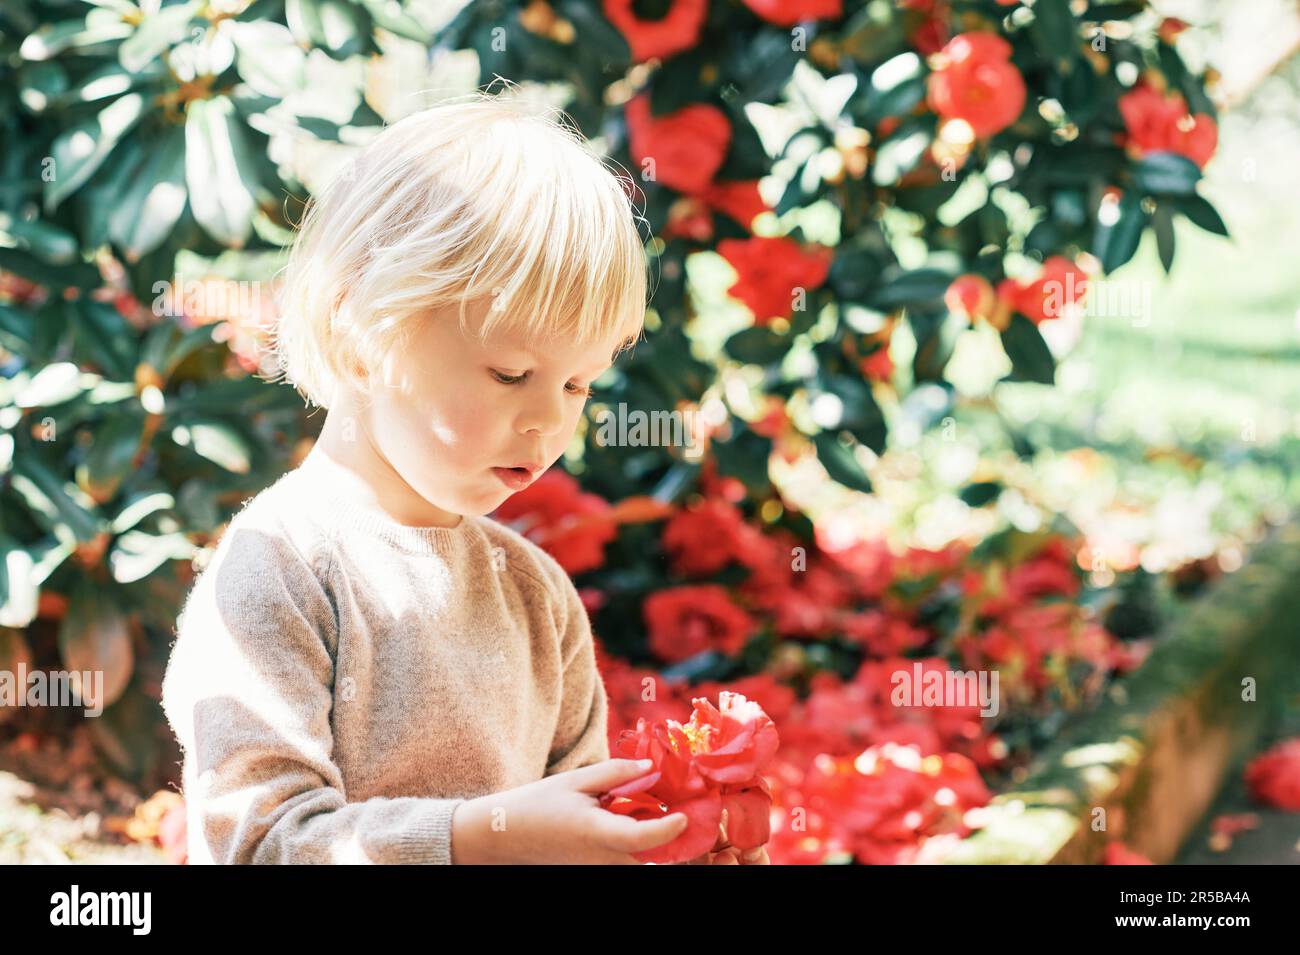 Outdoor portrait of sweet child playing with red camellia flower Stock Photo